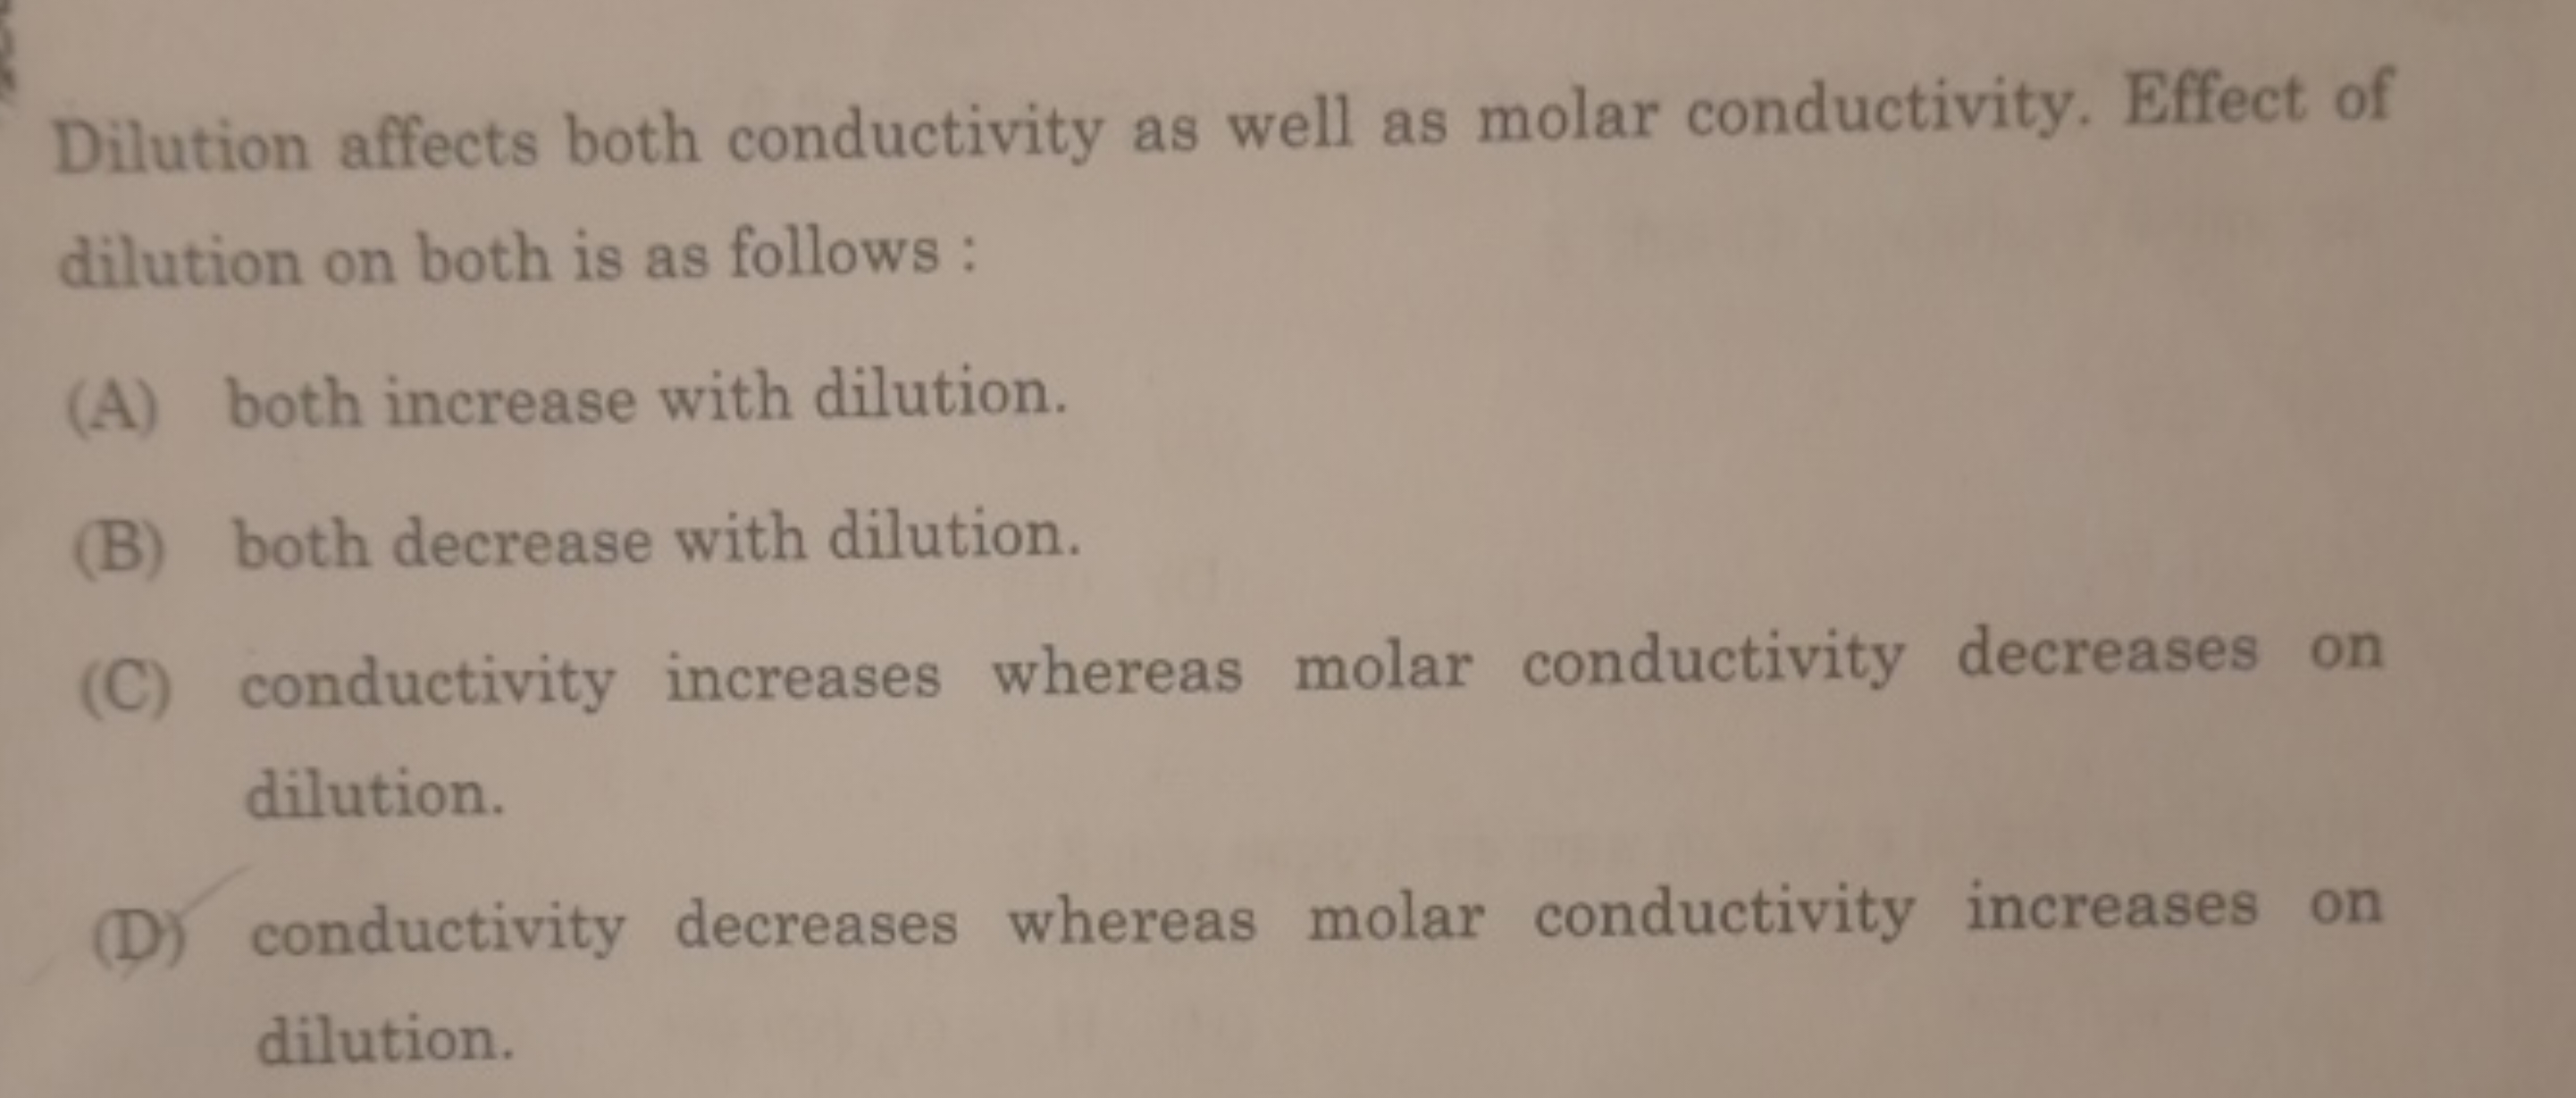 Dilution affects both conductivity as well as molar conductivity. Effe